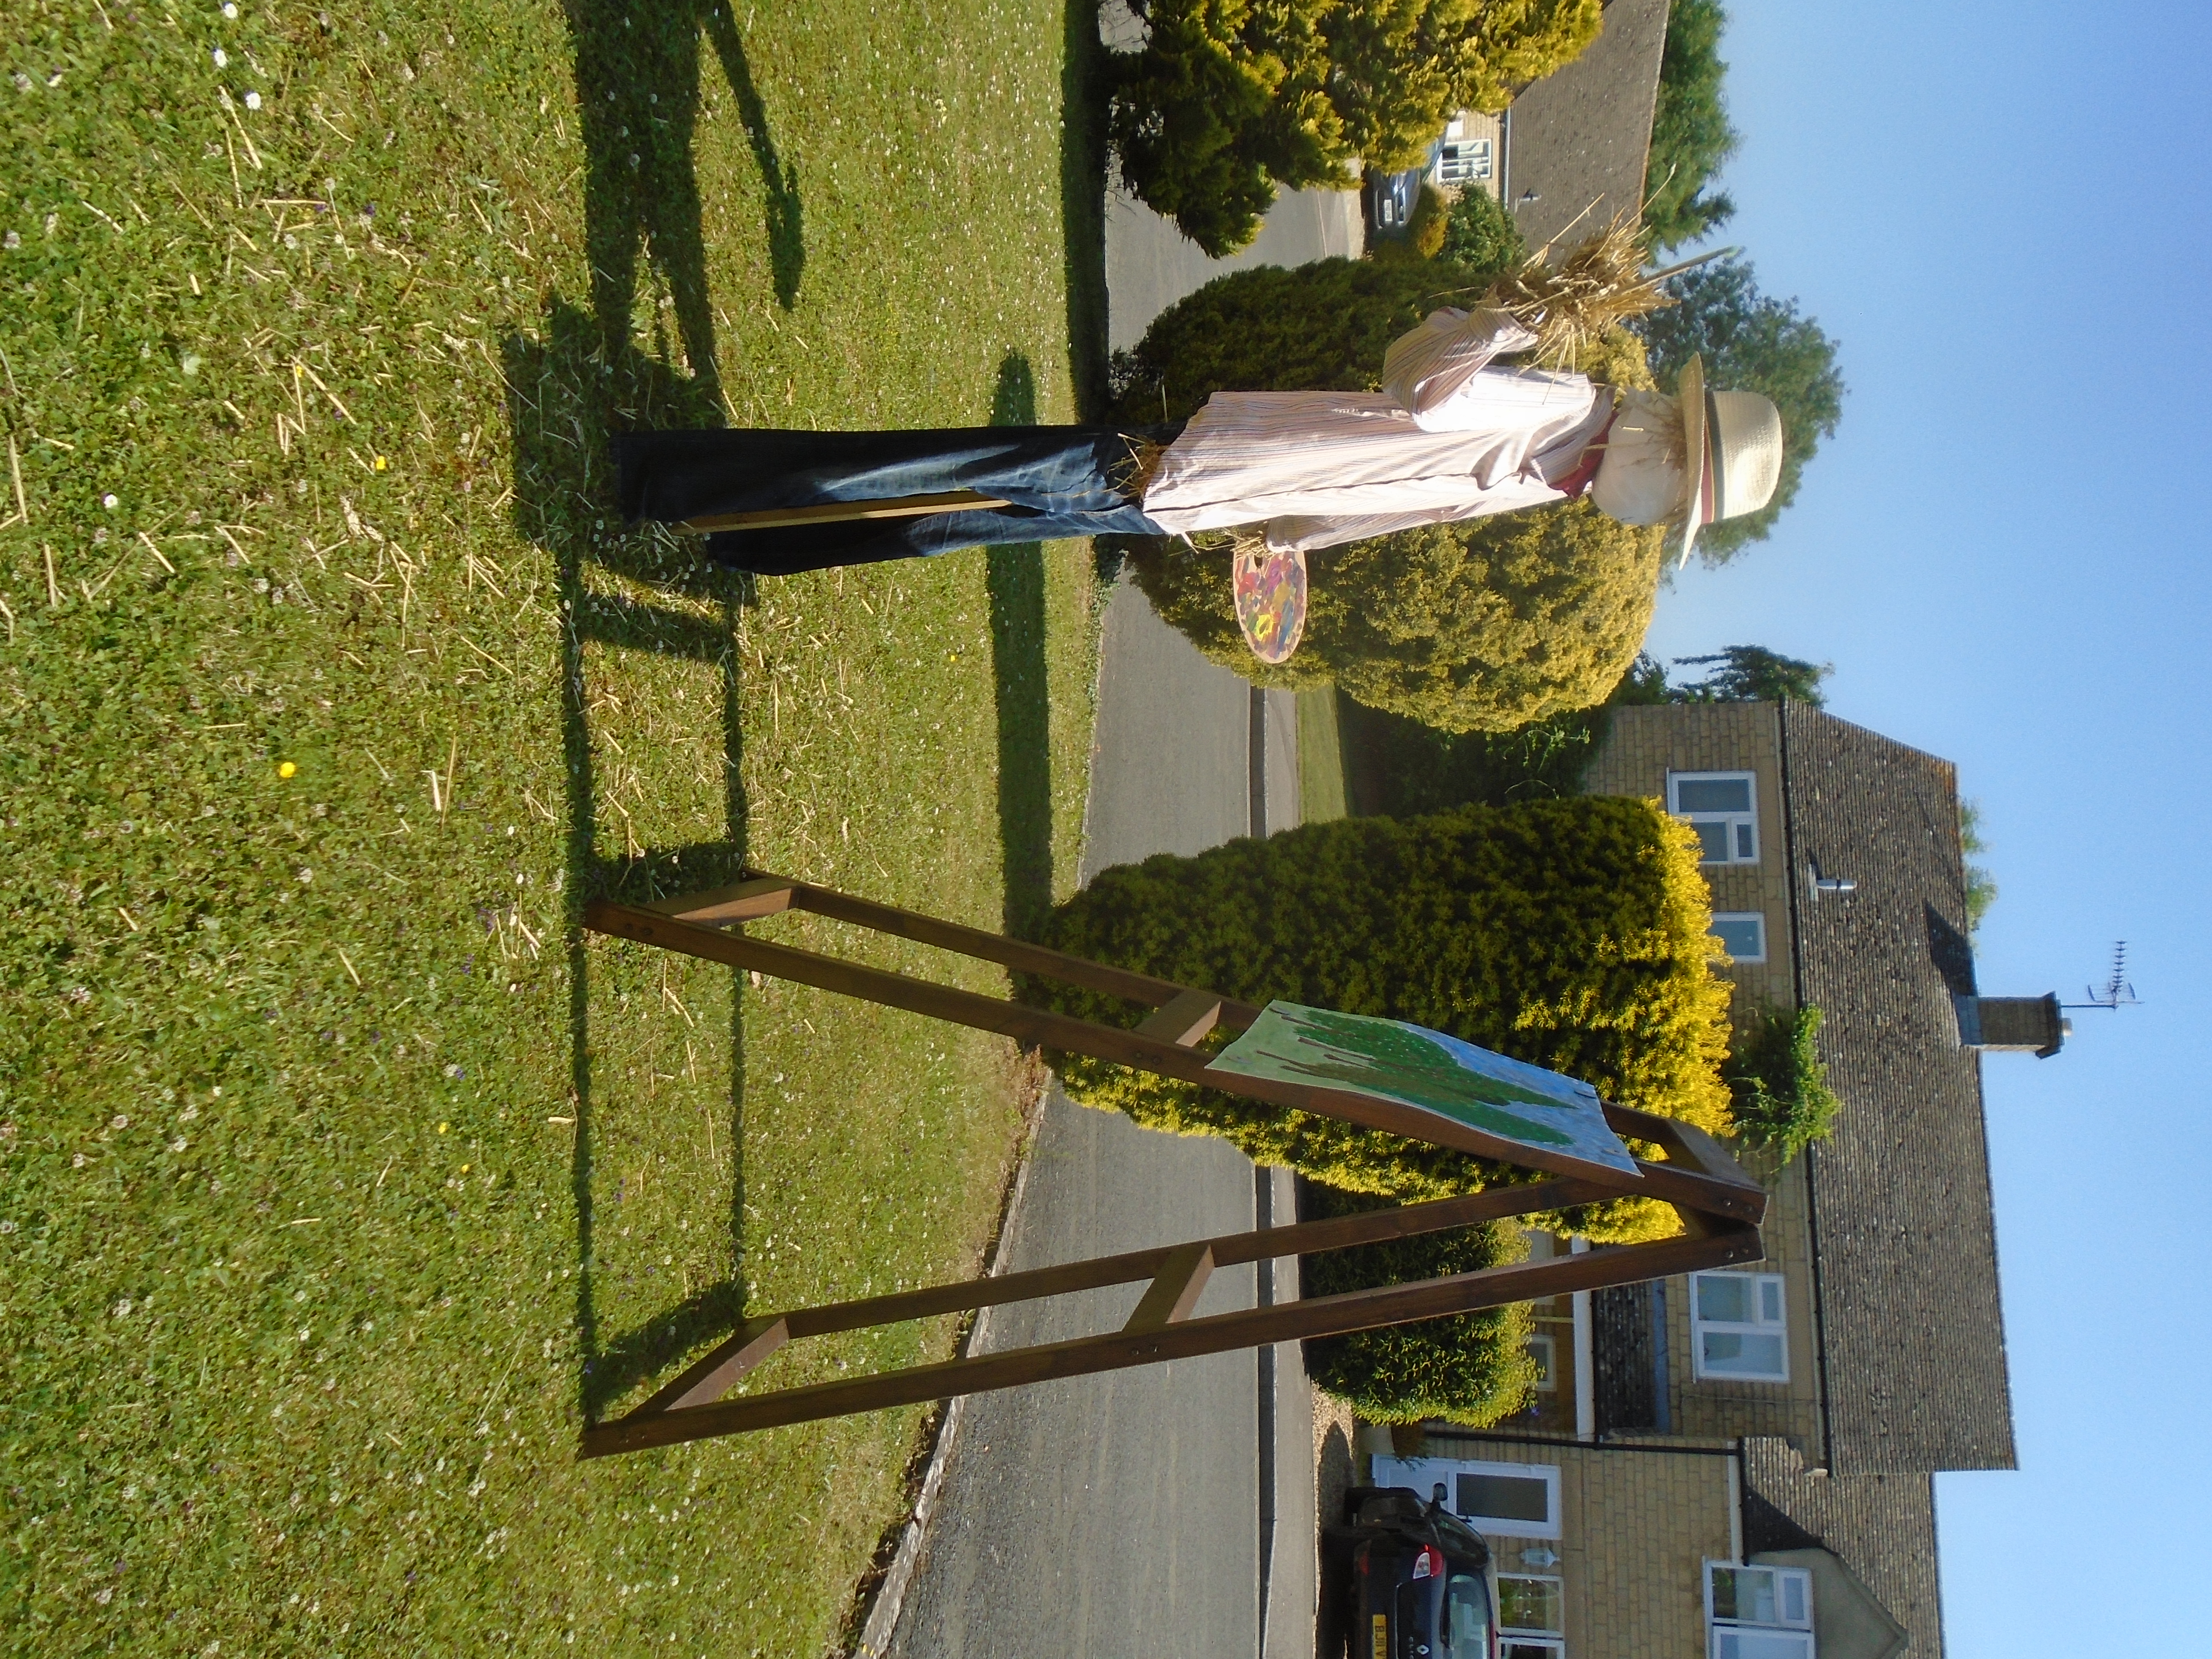 Willersey Scarecrows 202208 A Woman's work is never done